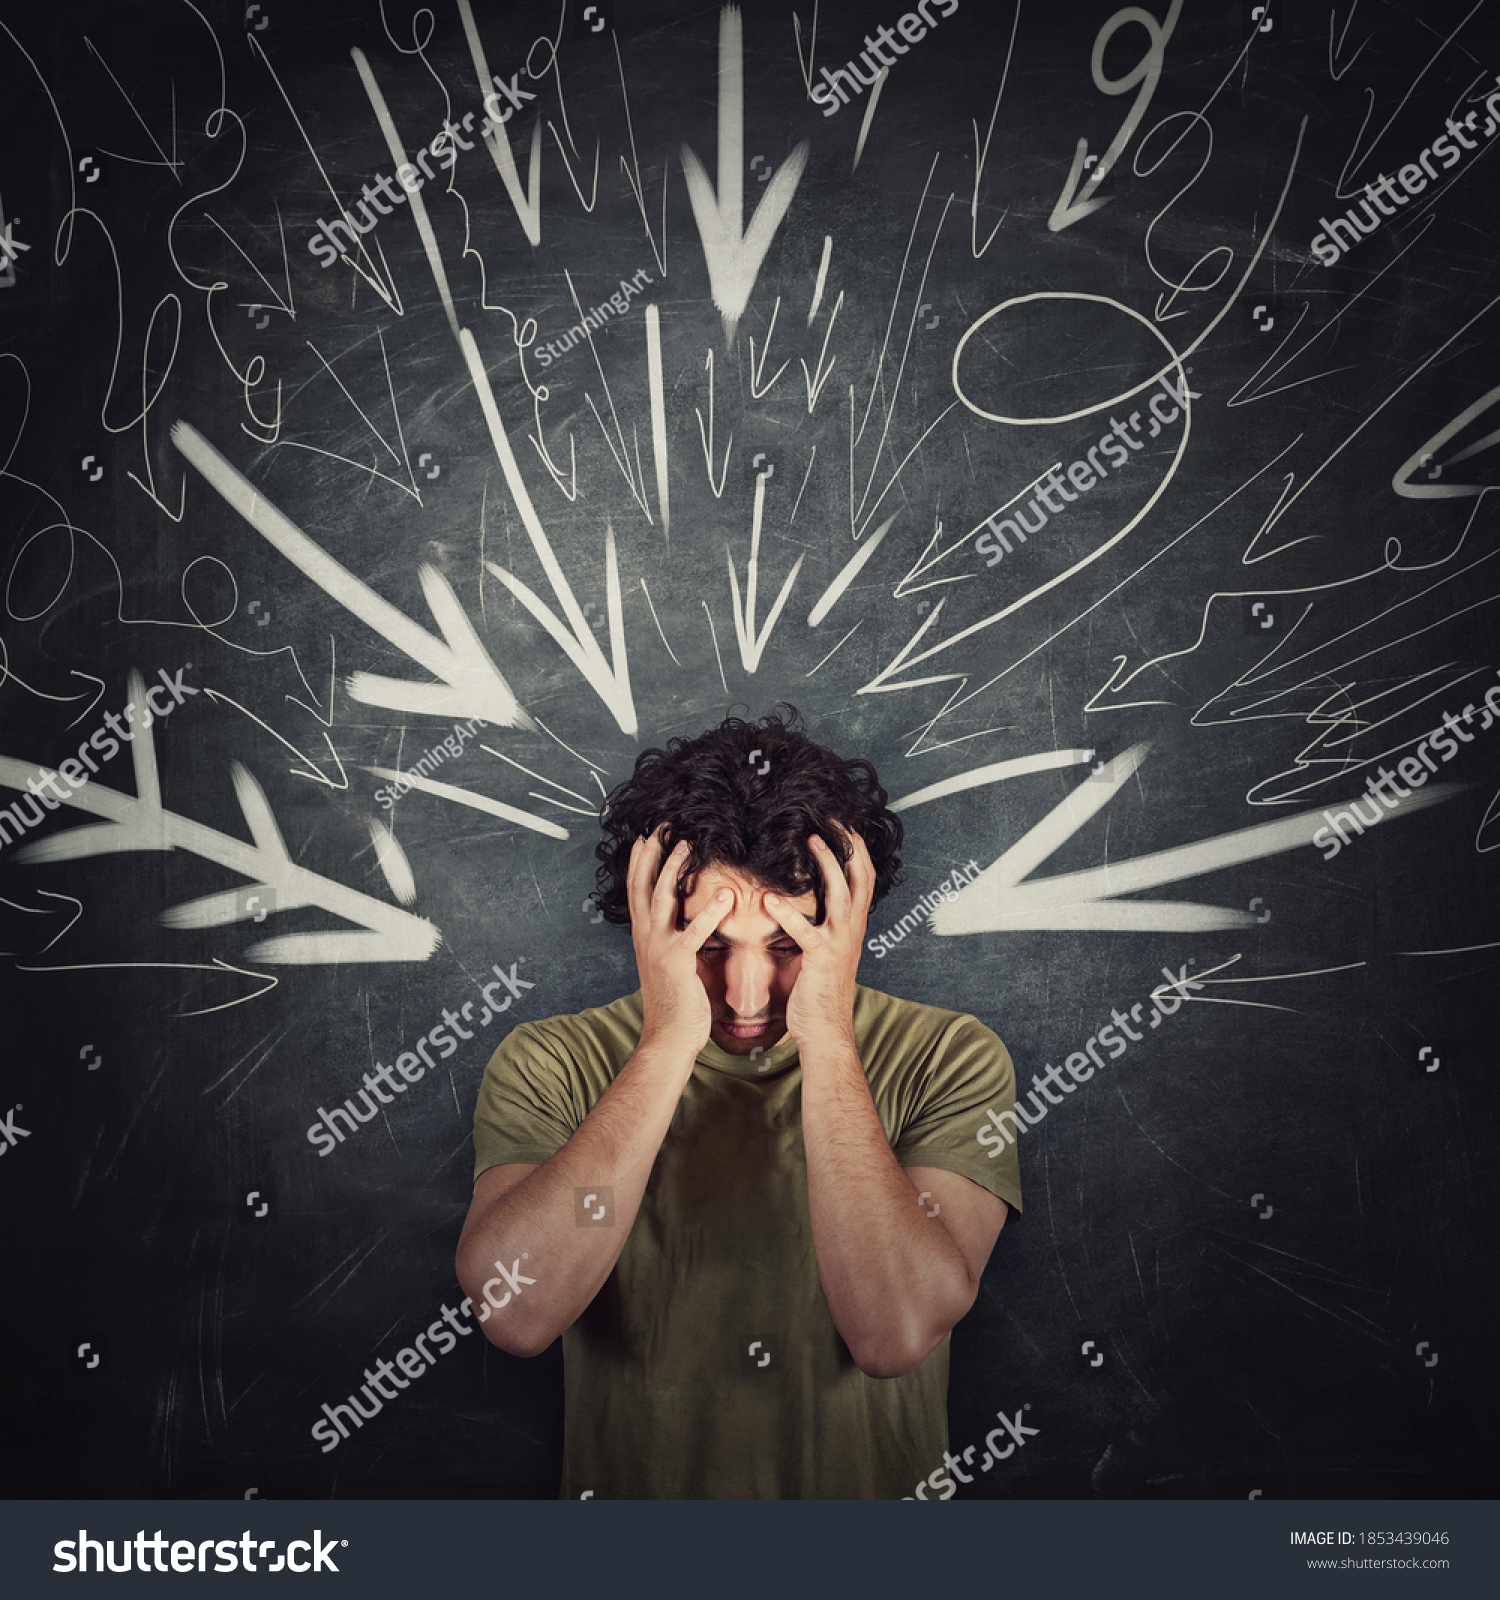 Disappointed guy covers face with his hands, looking down introverted and depressed, being under pressure as multiple arrows points tension negativity to his head. Person suffering emotional breakdown #1853439046